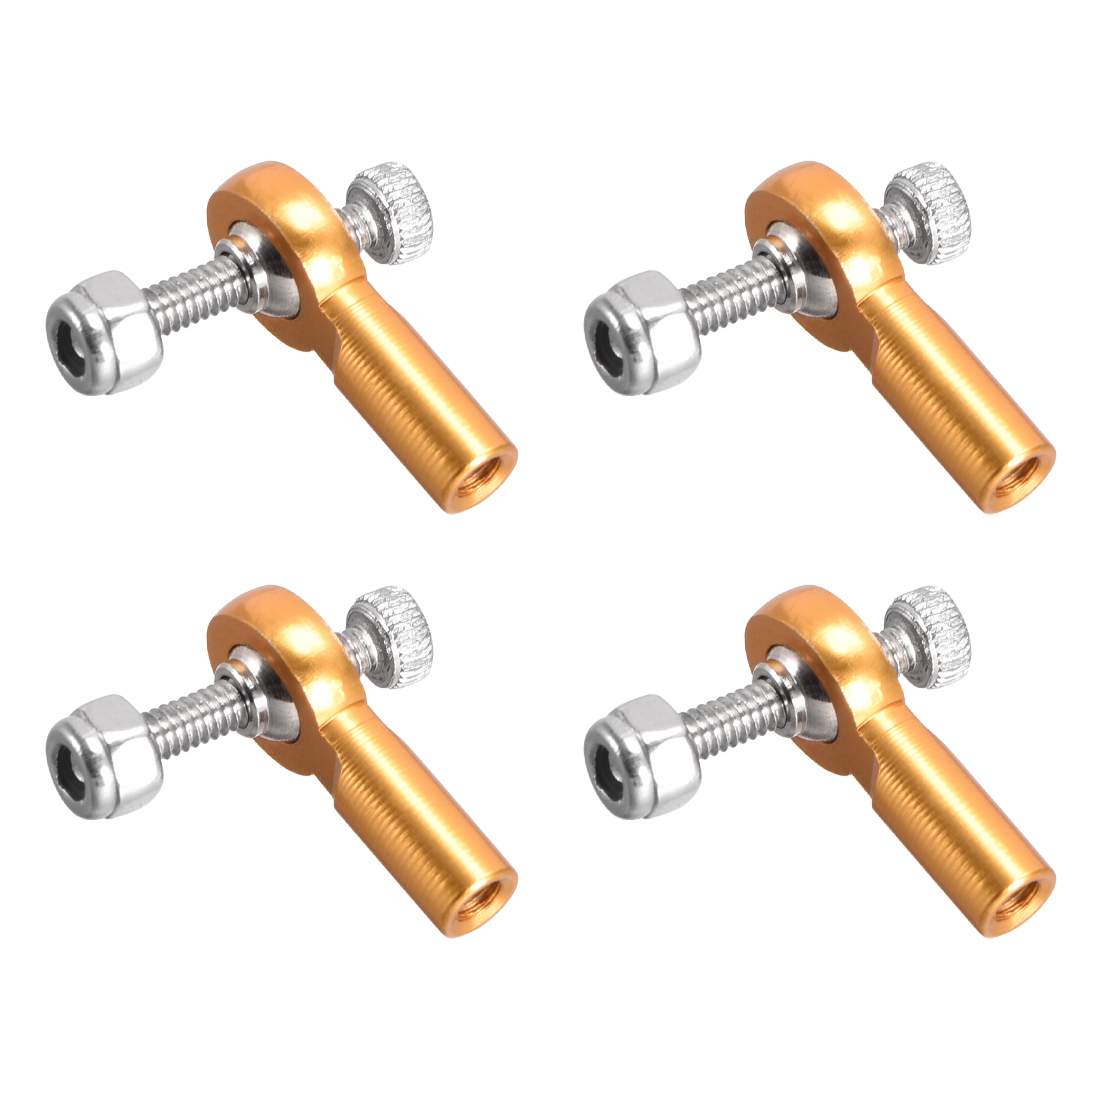 Unique Bargains 4 PCS M2/2mm 15mm Rod End Tie End Ball Head Joint Adapter Gold Tone for RC Boat